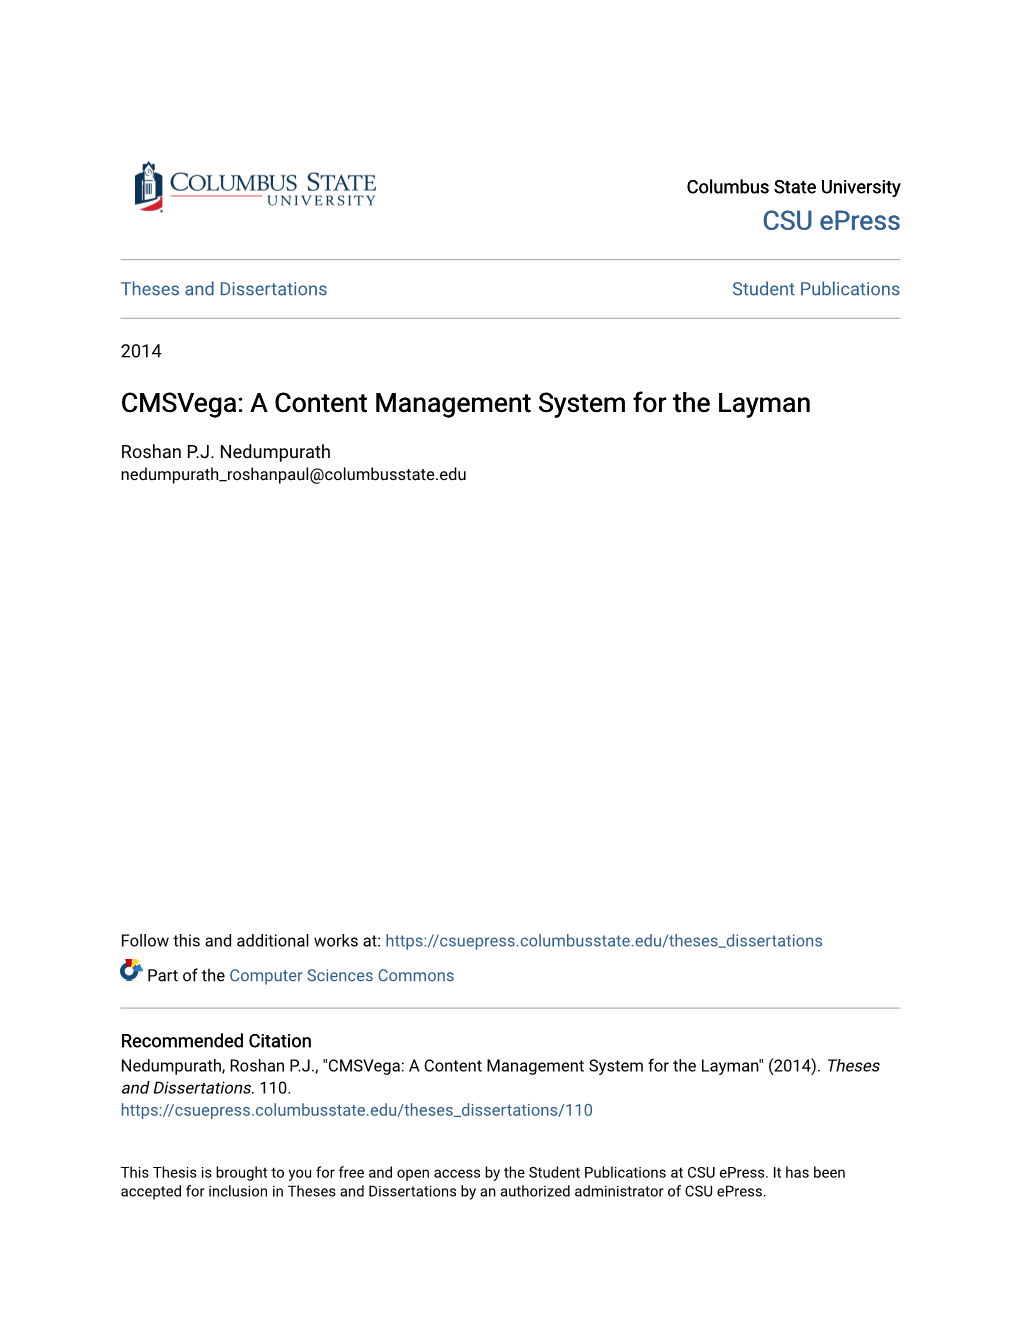 A Content Management System for the Layman